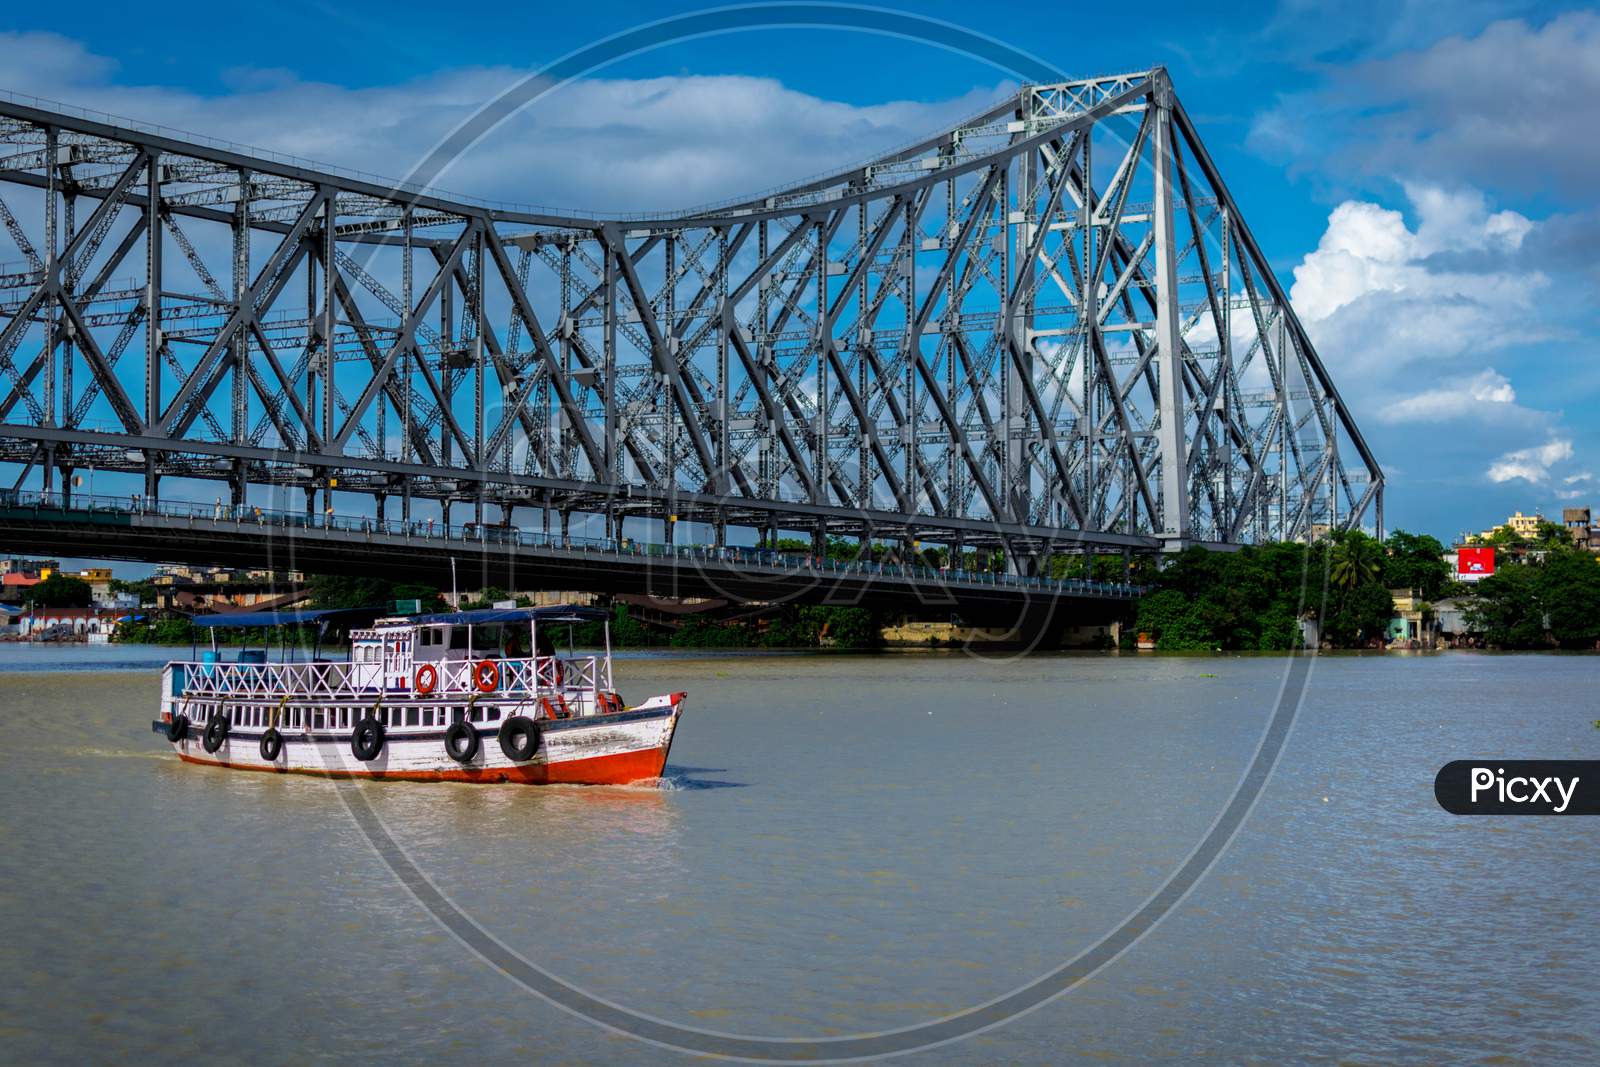 Howrah Bridge Is A Bridge With A Suspended Span Over The Hooghly River In West Bengal